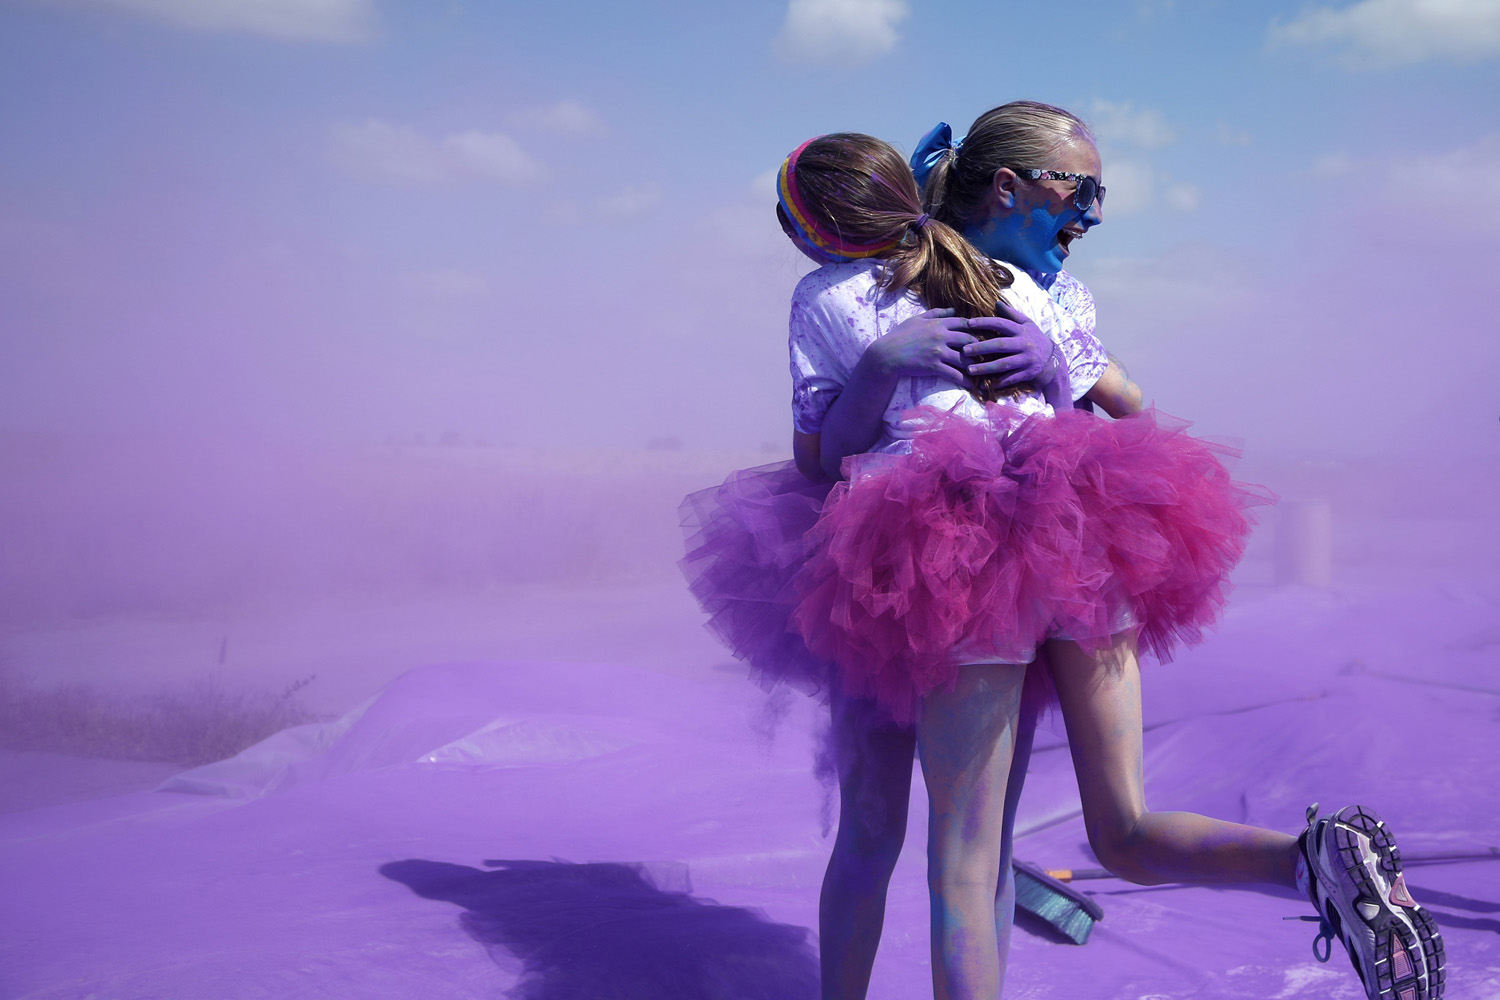 Competitors hug after running through colored powder at the Orange County Color 5K Run in Irvine, Calif., on May 10, 2014.